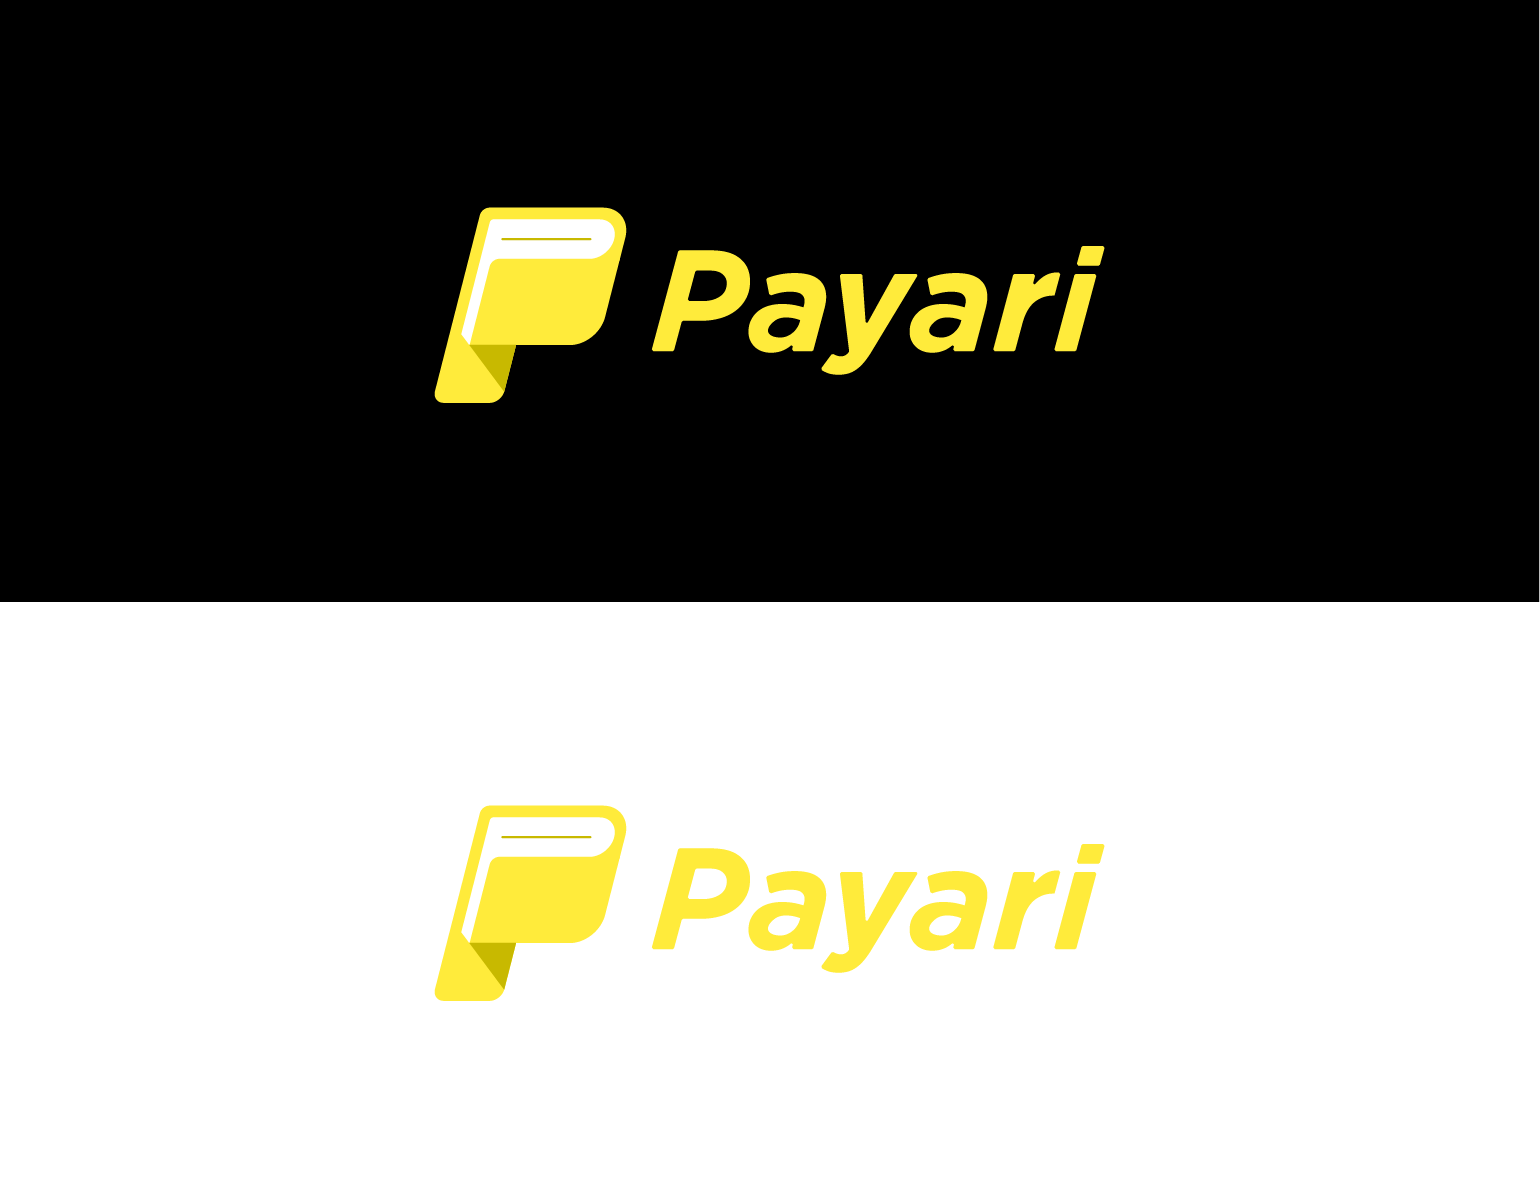 Payari Logo Letter P In Wallet Shape Recognizable In Black And